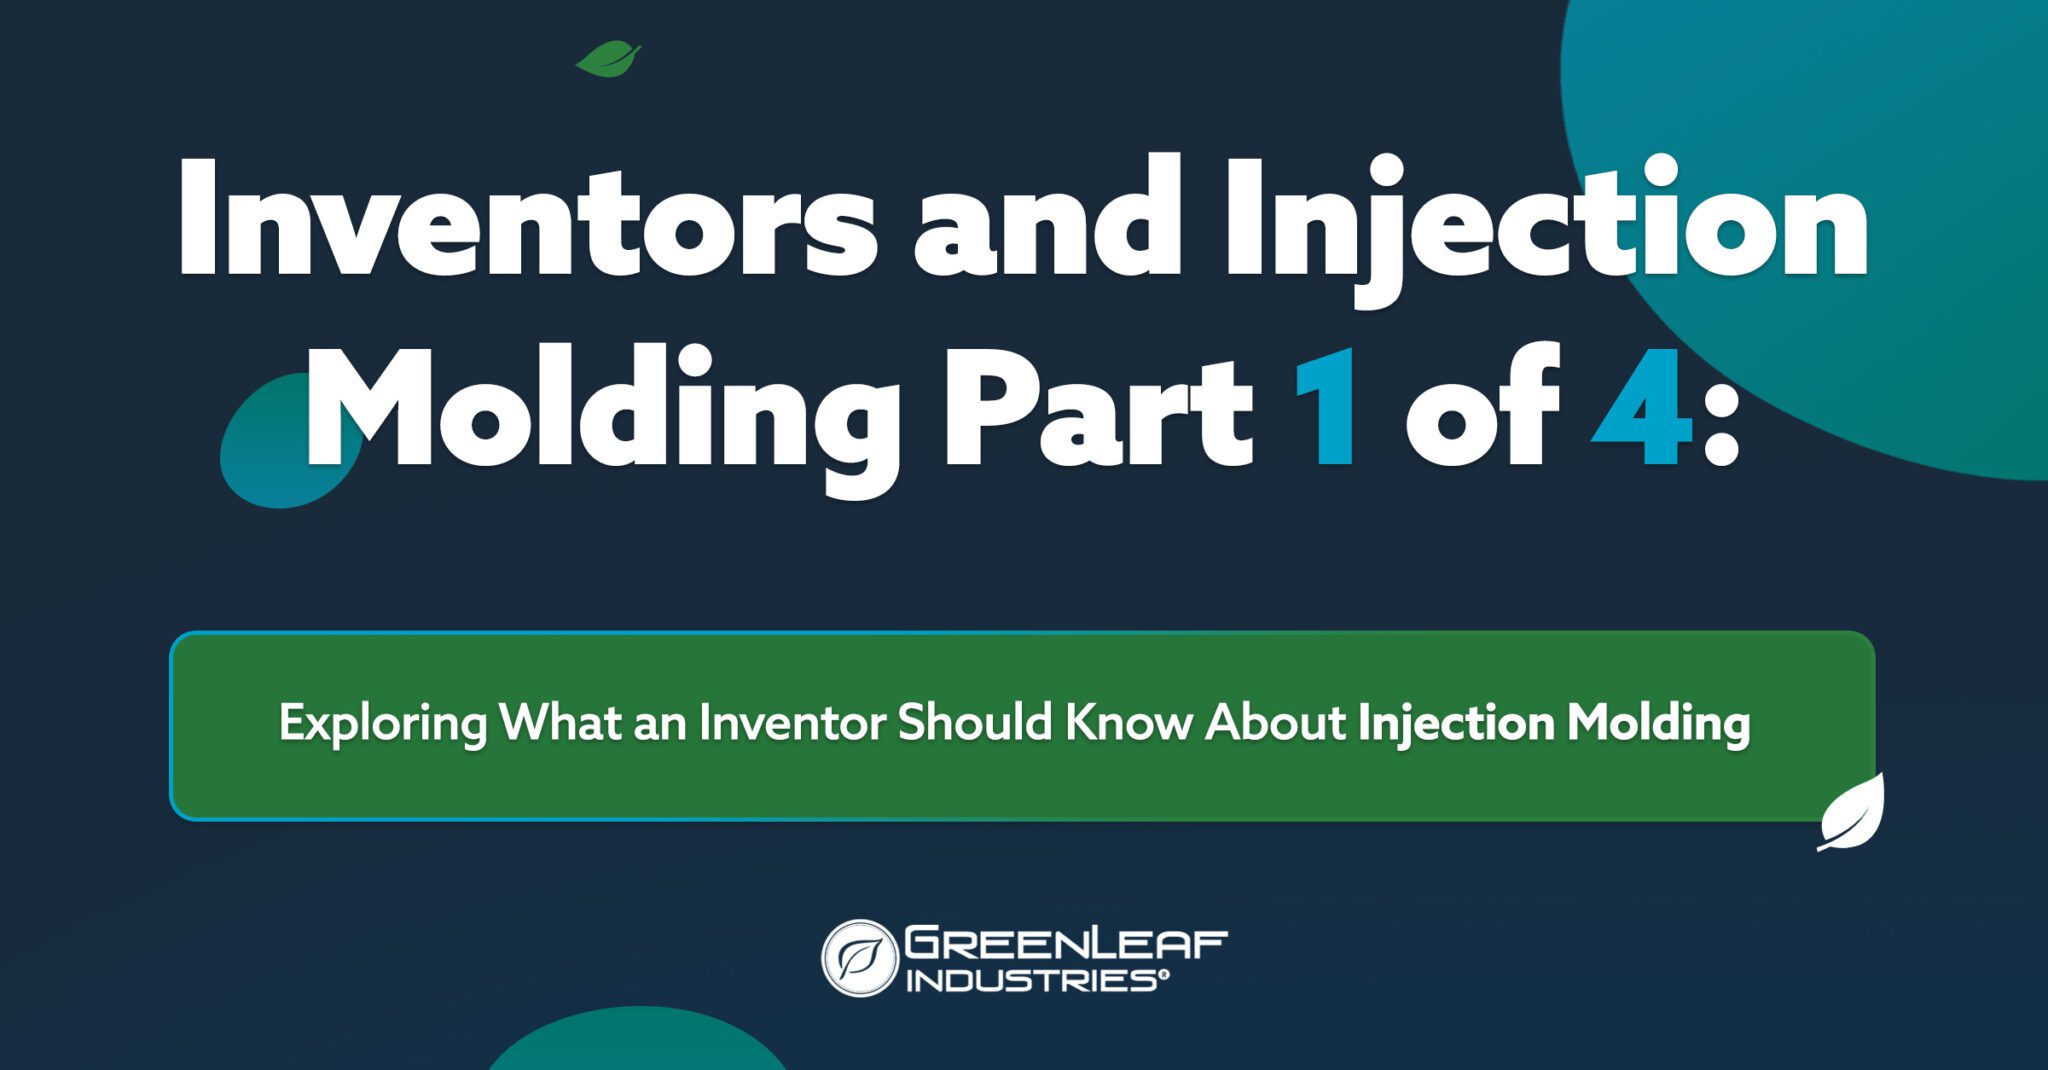 Inventors and Injection Molding Part 1